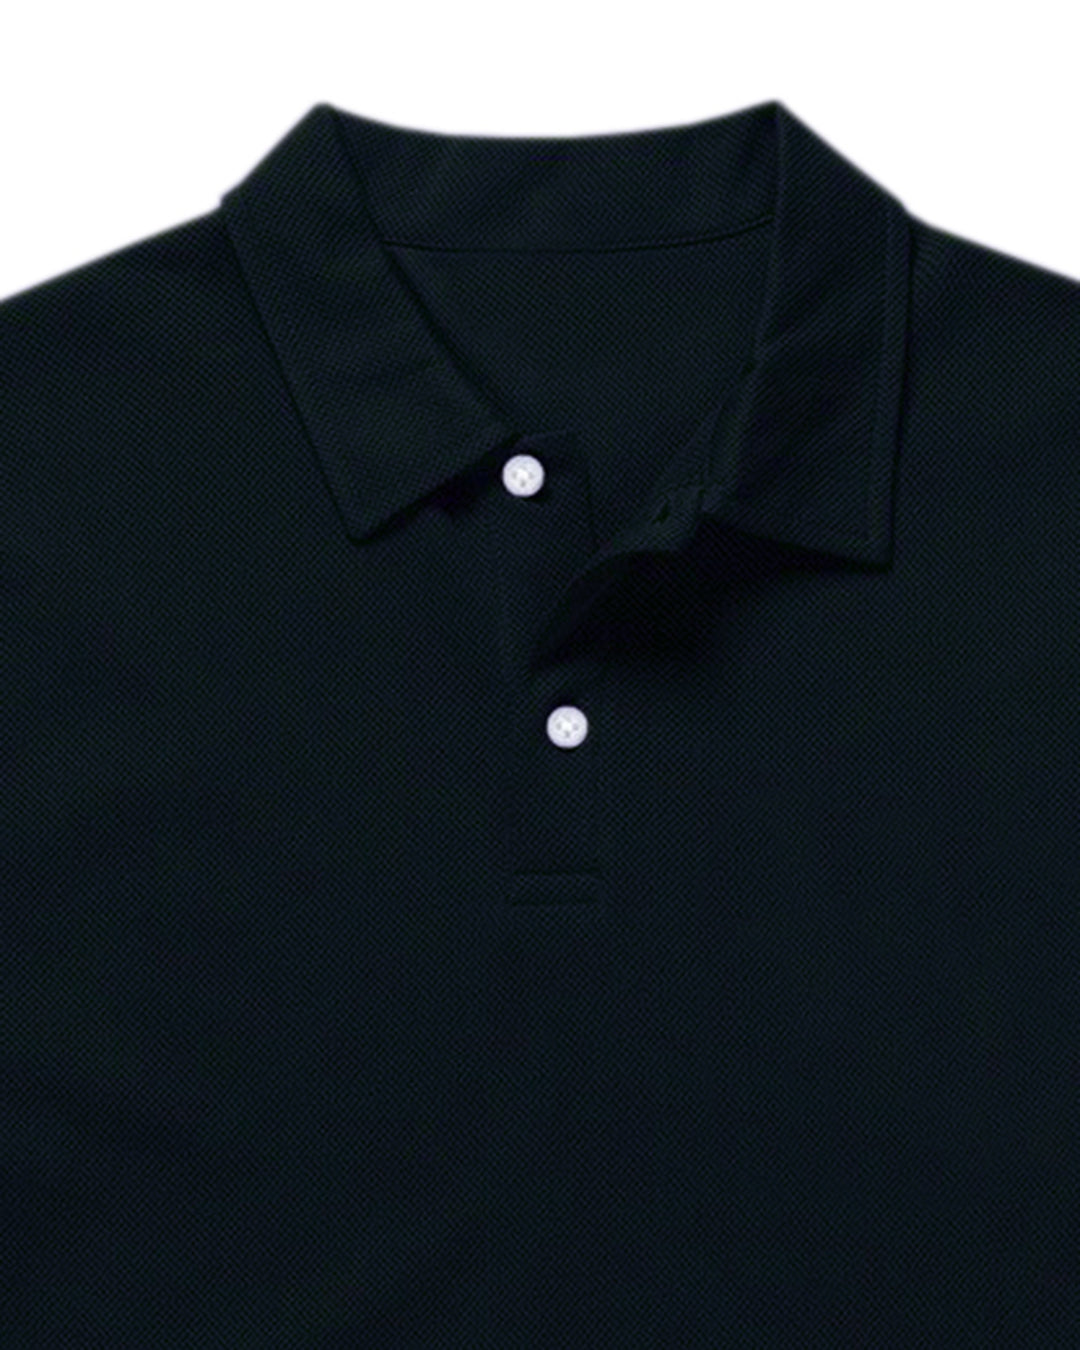 Collar of the custom oxford polo shirt for men by Luxire in dark navy